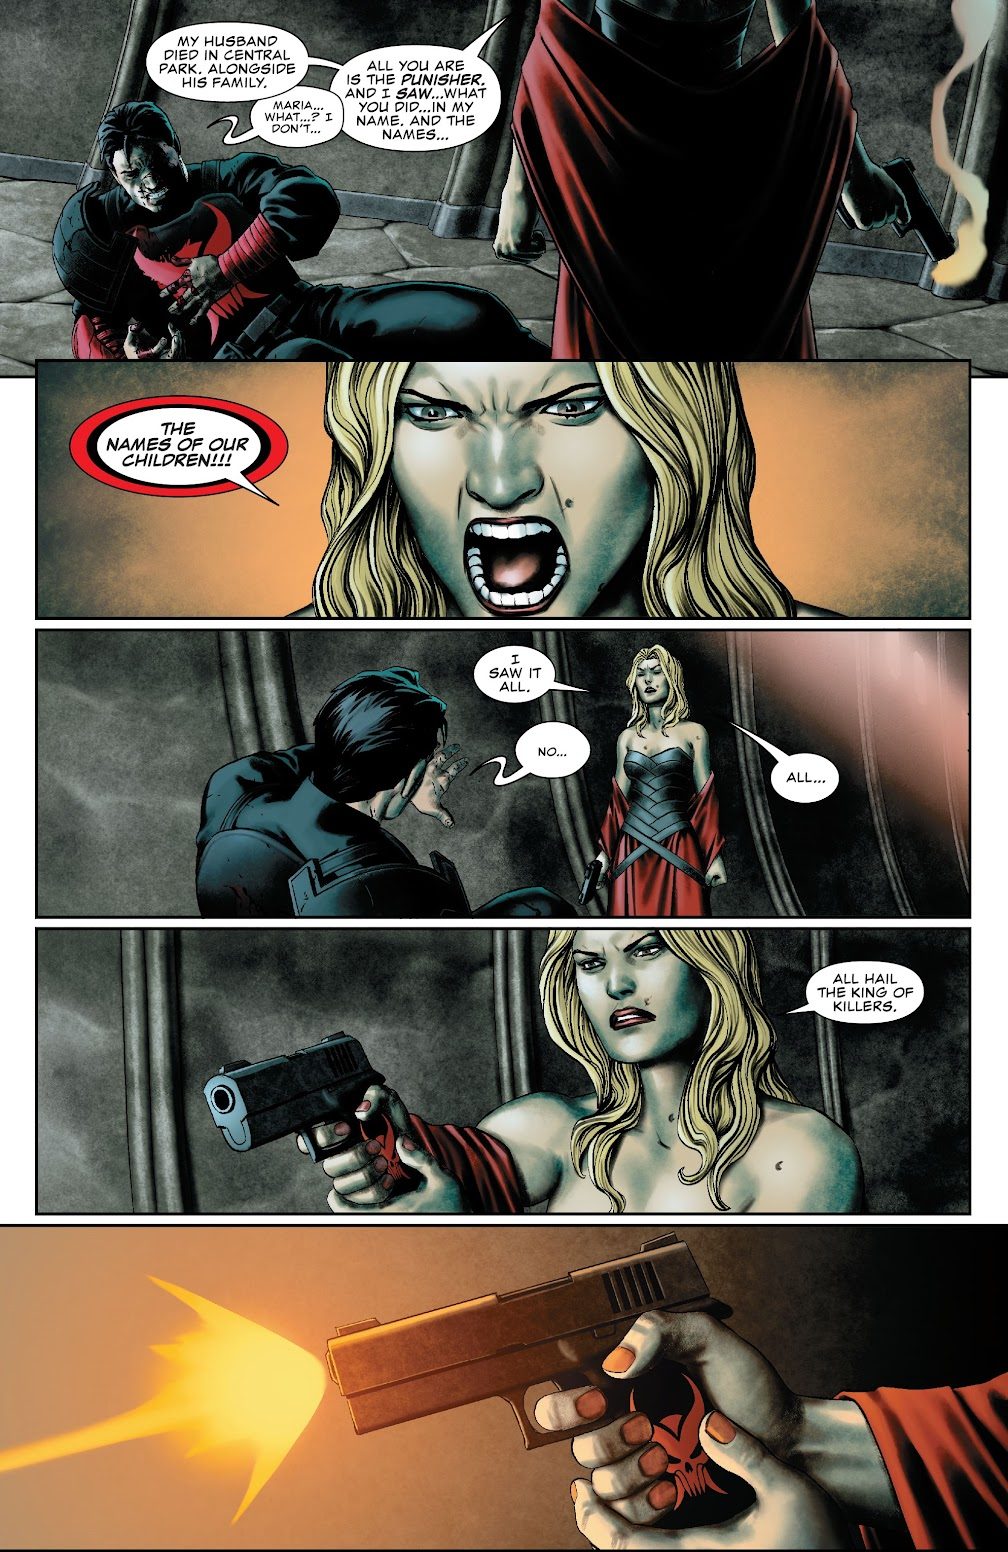 The Punisher's Wife Shoots Him